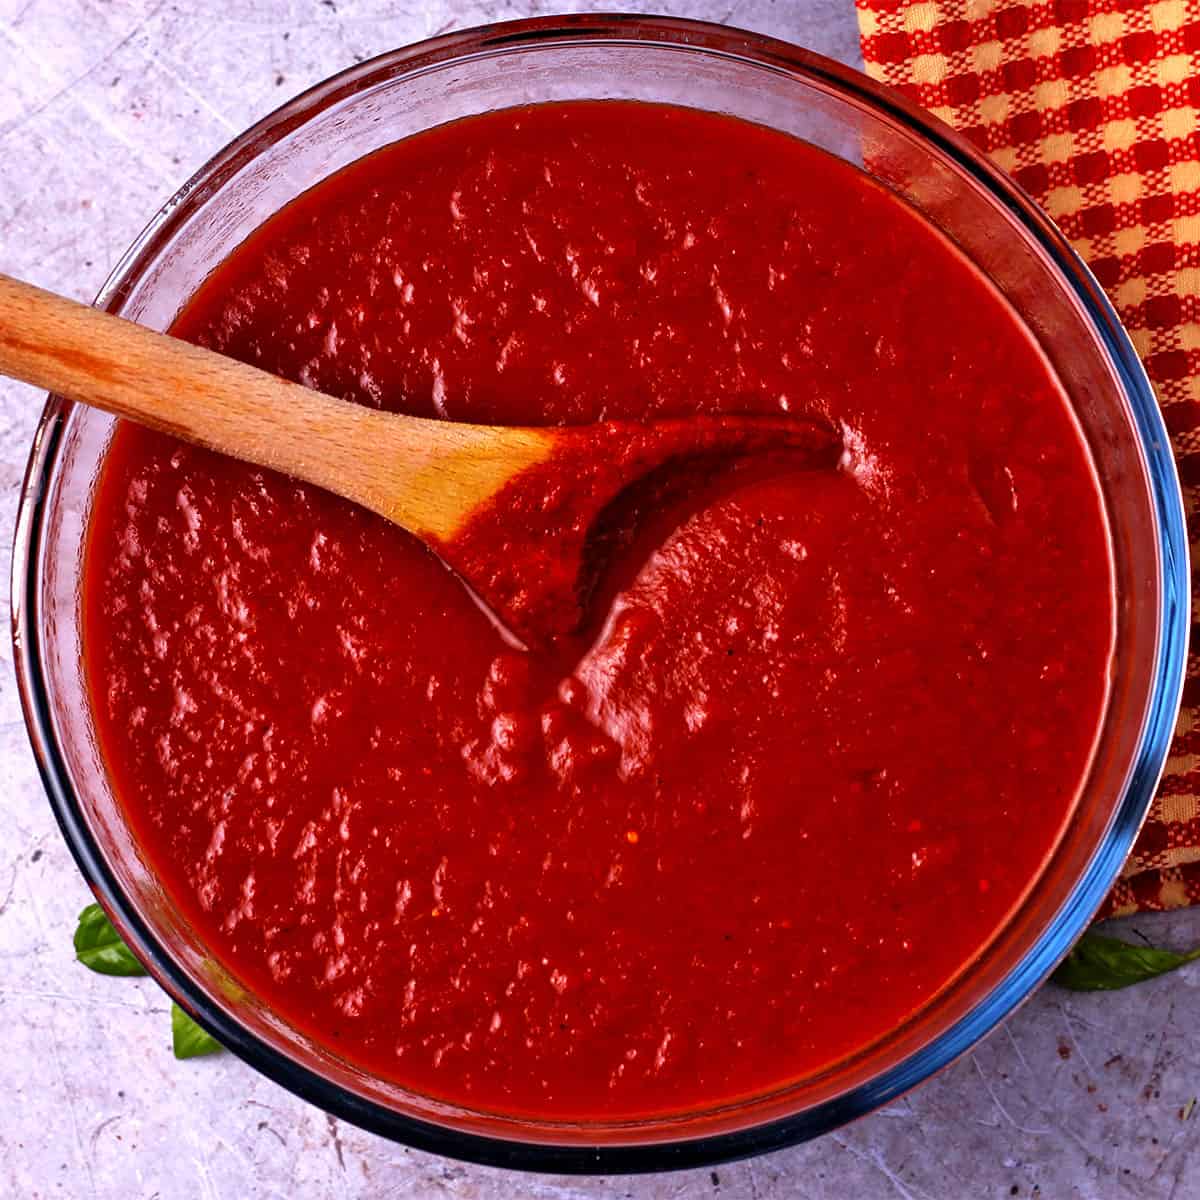 A glass bowl filled with tomato sauce.